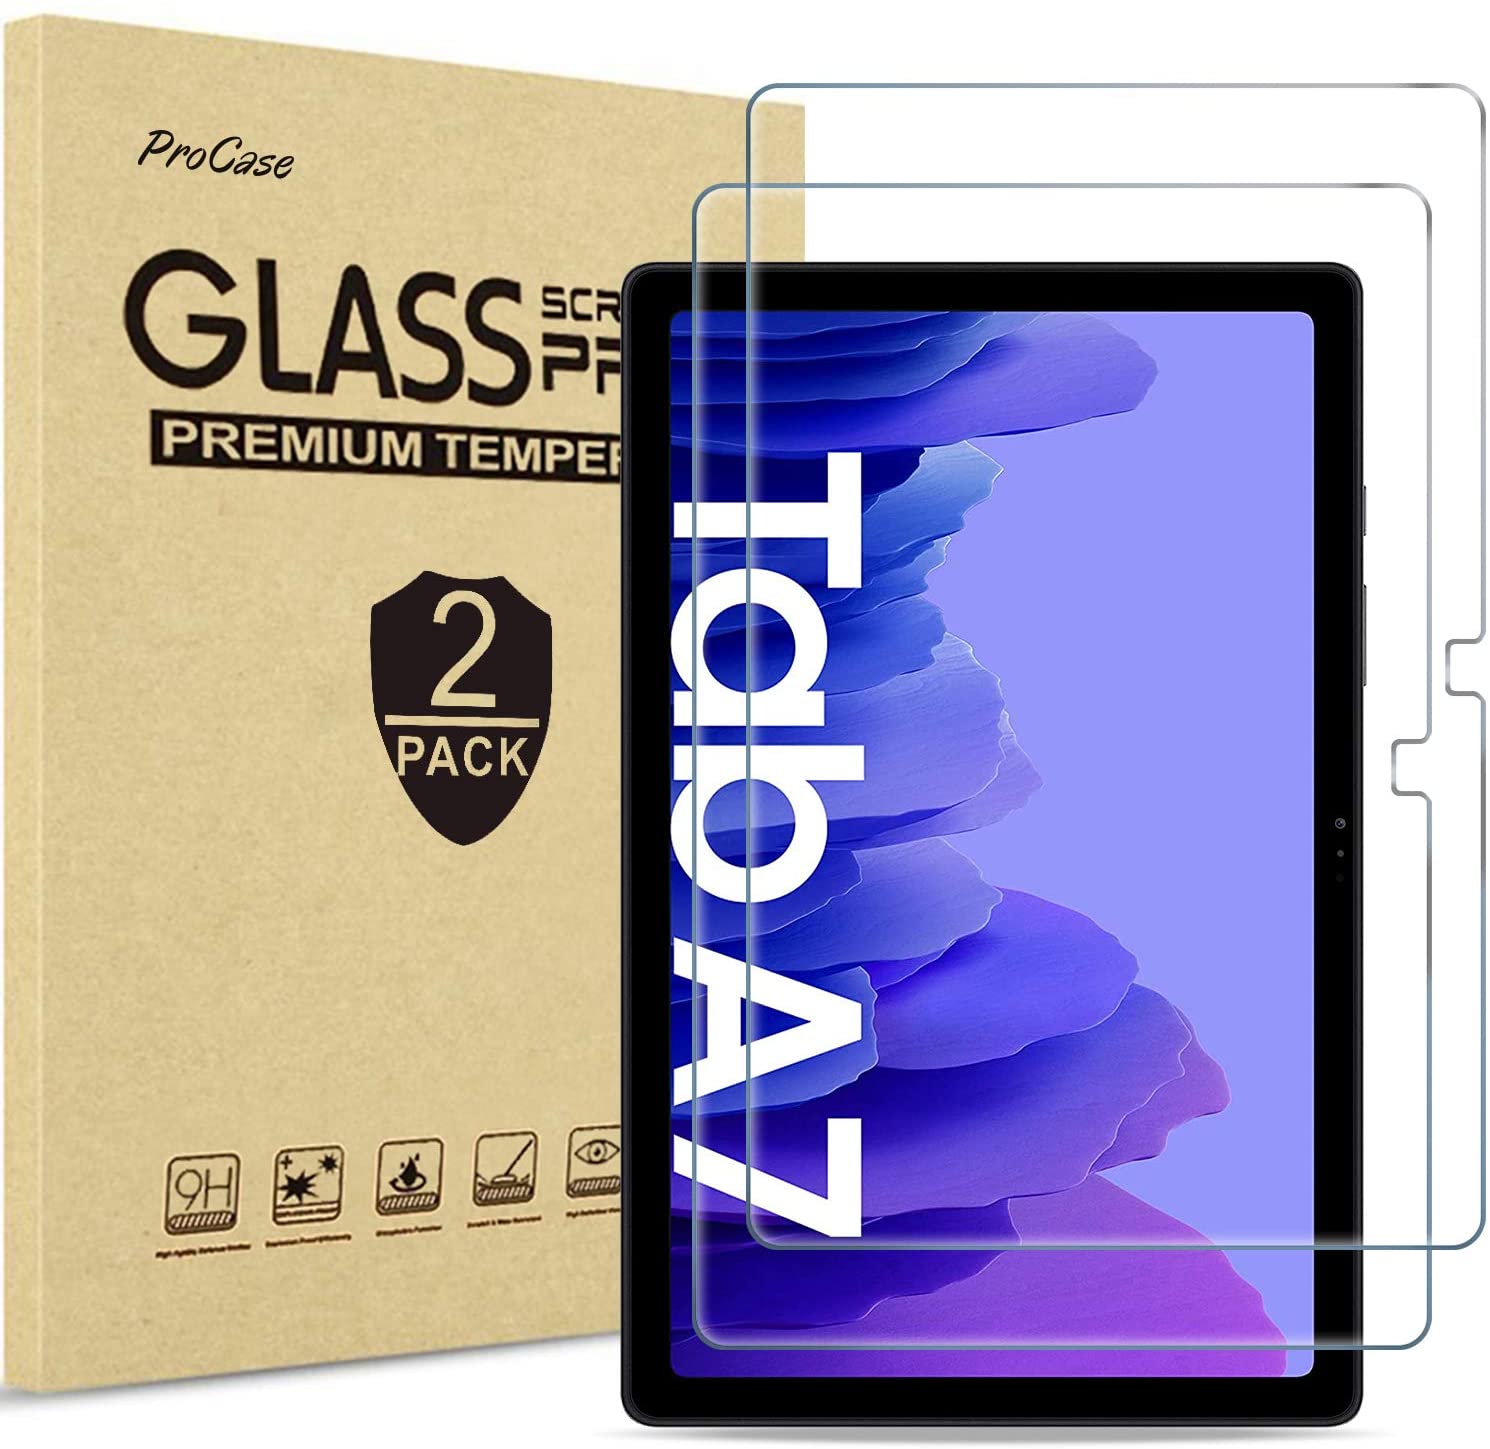 2 Pack ProCase Galaxy Tab A7 10.4 2020 Screen Protector T500 T503 T505 T507, Tempered Glass Screen Film Guard for 10.4 Inch Galaxy Tab A7 2020 Tablet SM-T500 SM-T503 SM-T505 SM-T507.